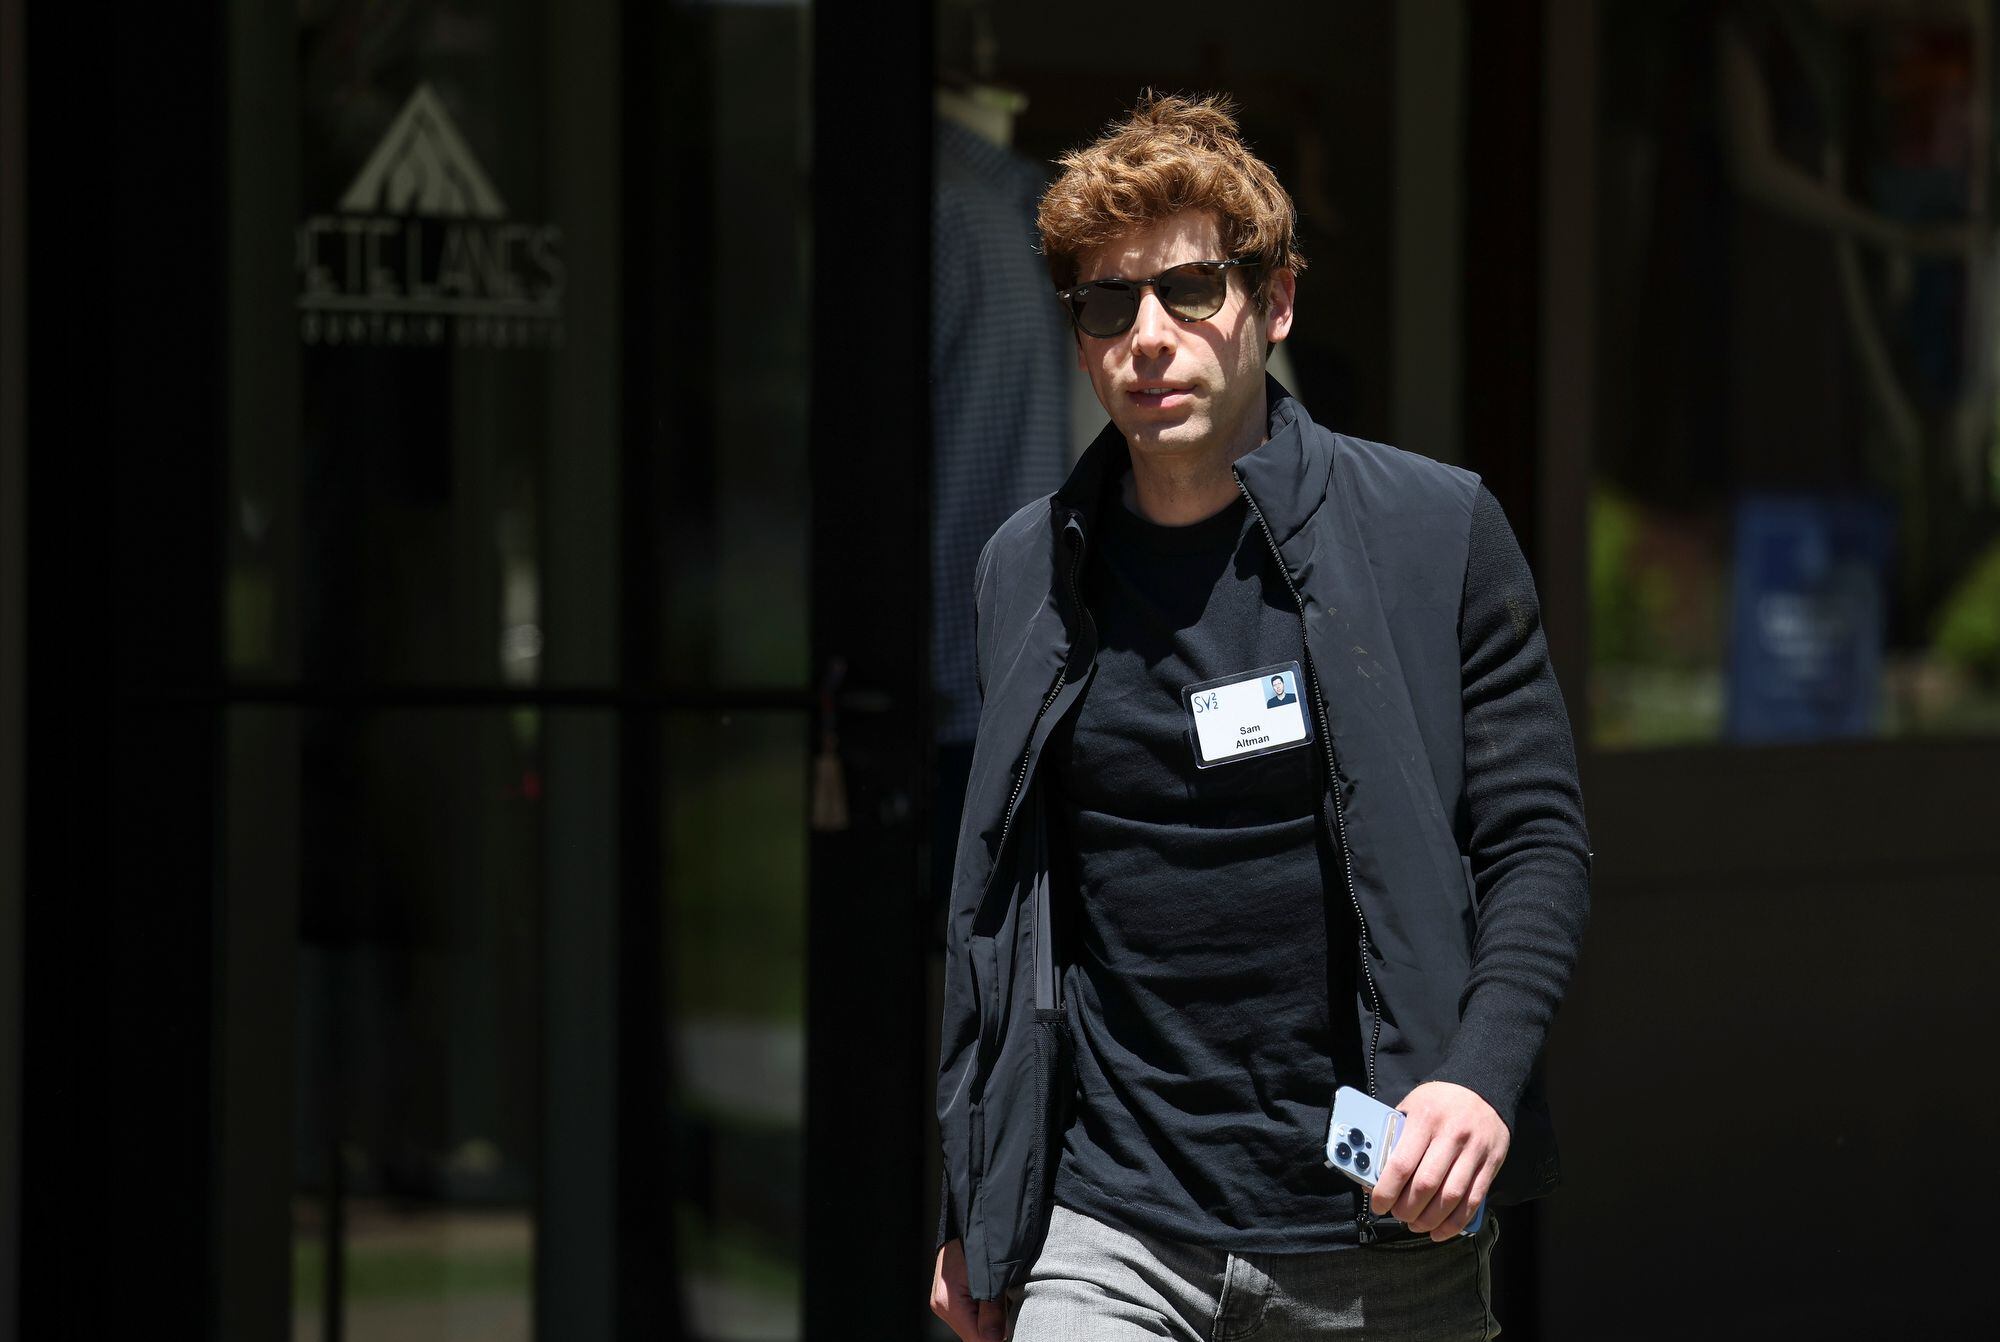 SUN VALLEY, IDAHO - JULY 06: Sam Altman, CEO of OpenAI, walks from lunch during the Allen & Company Sun Valley Conference on July 06, 2022 in Sun Valley, Idaho. The world's most wealthy and powerful businesspeople from the media, finance, and technology will converge at the Sun Valley Resort this week for the exclusive conference. (Photo by Kevin Dietsch/Getty Images)